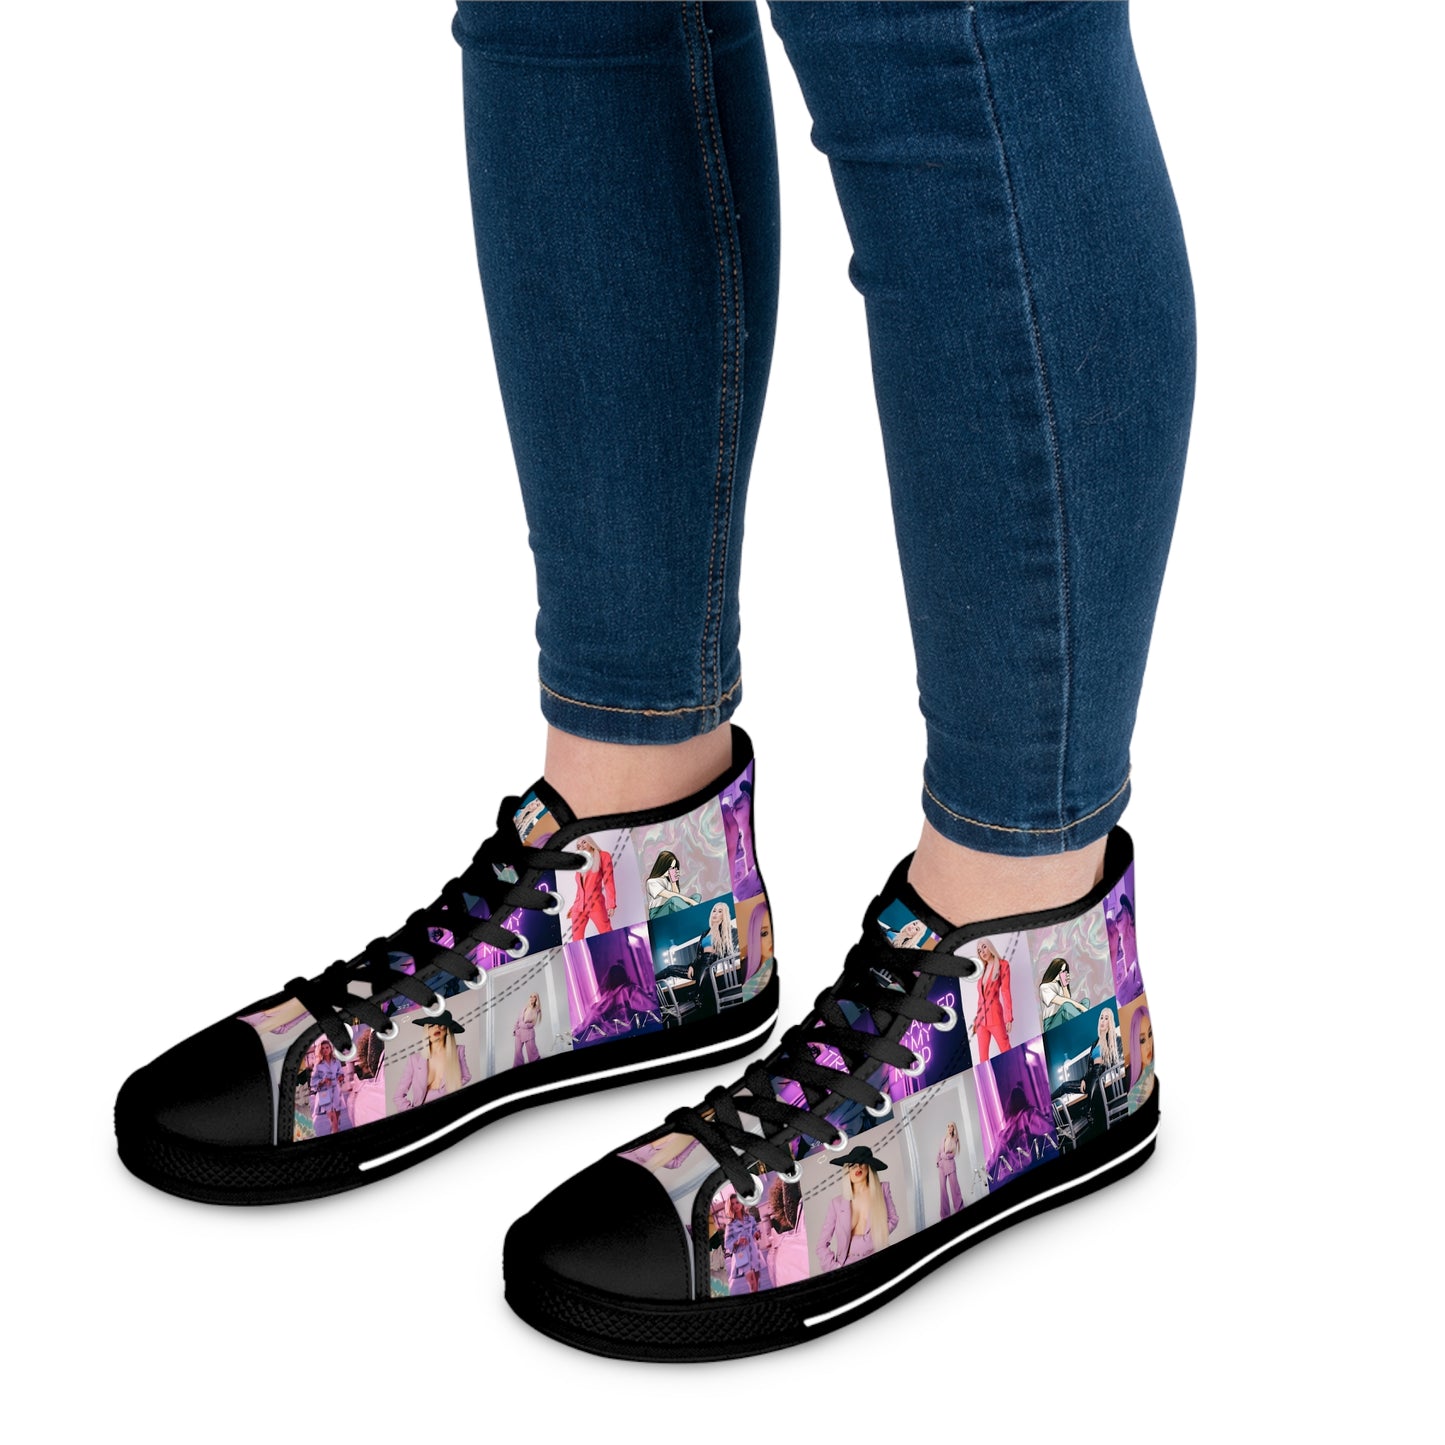 Ava Max Belladonna Photo Collage Women's High Top Sneakers